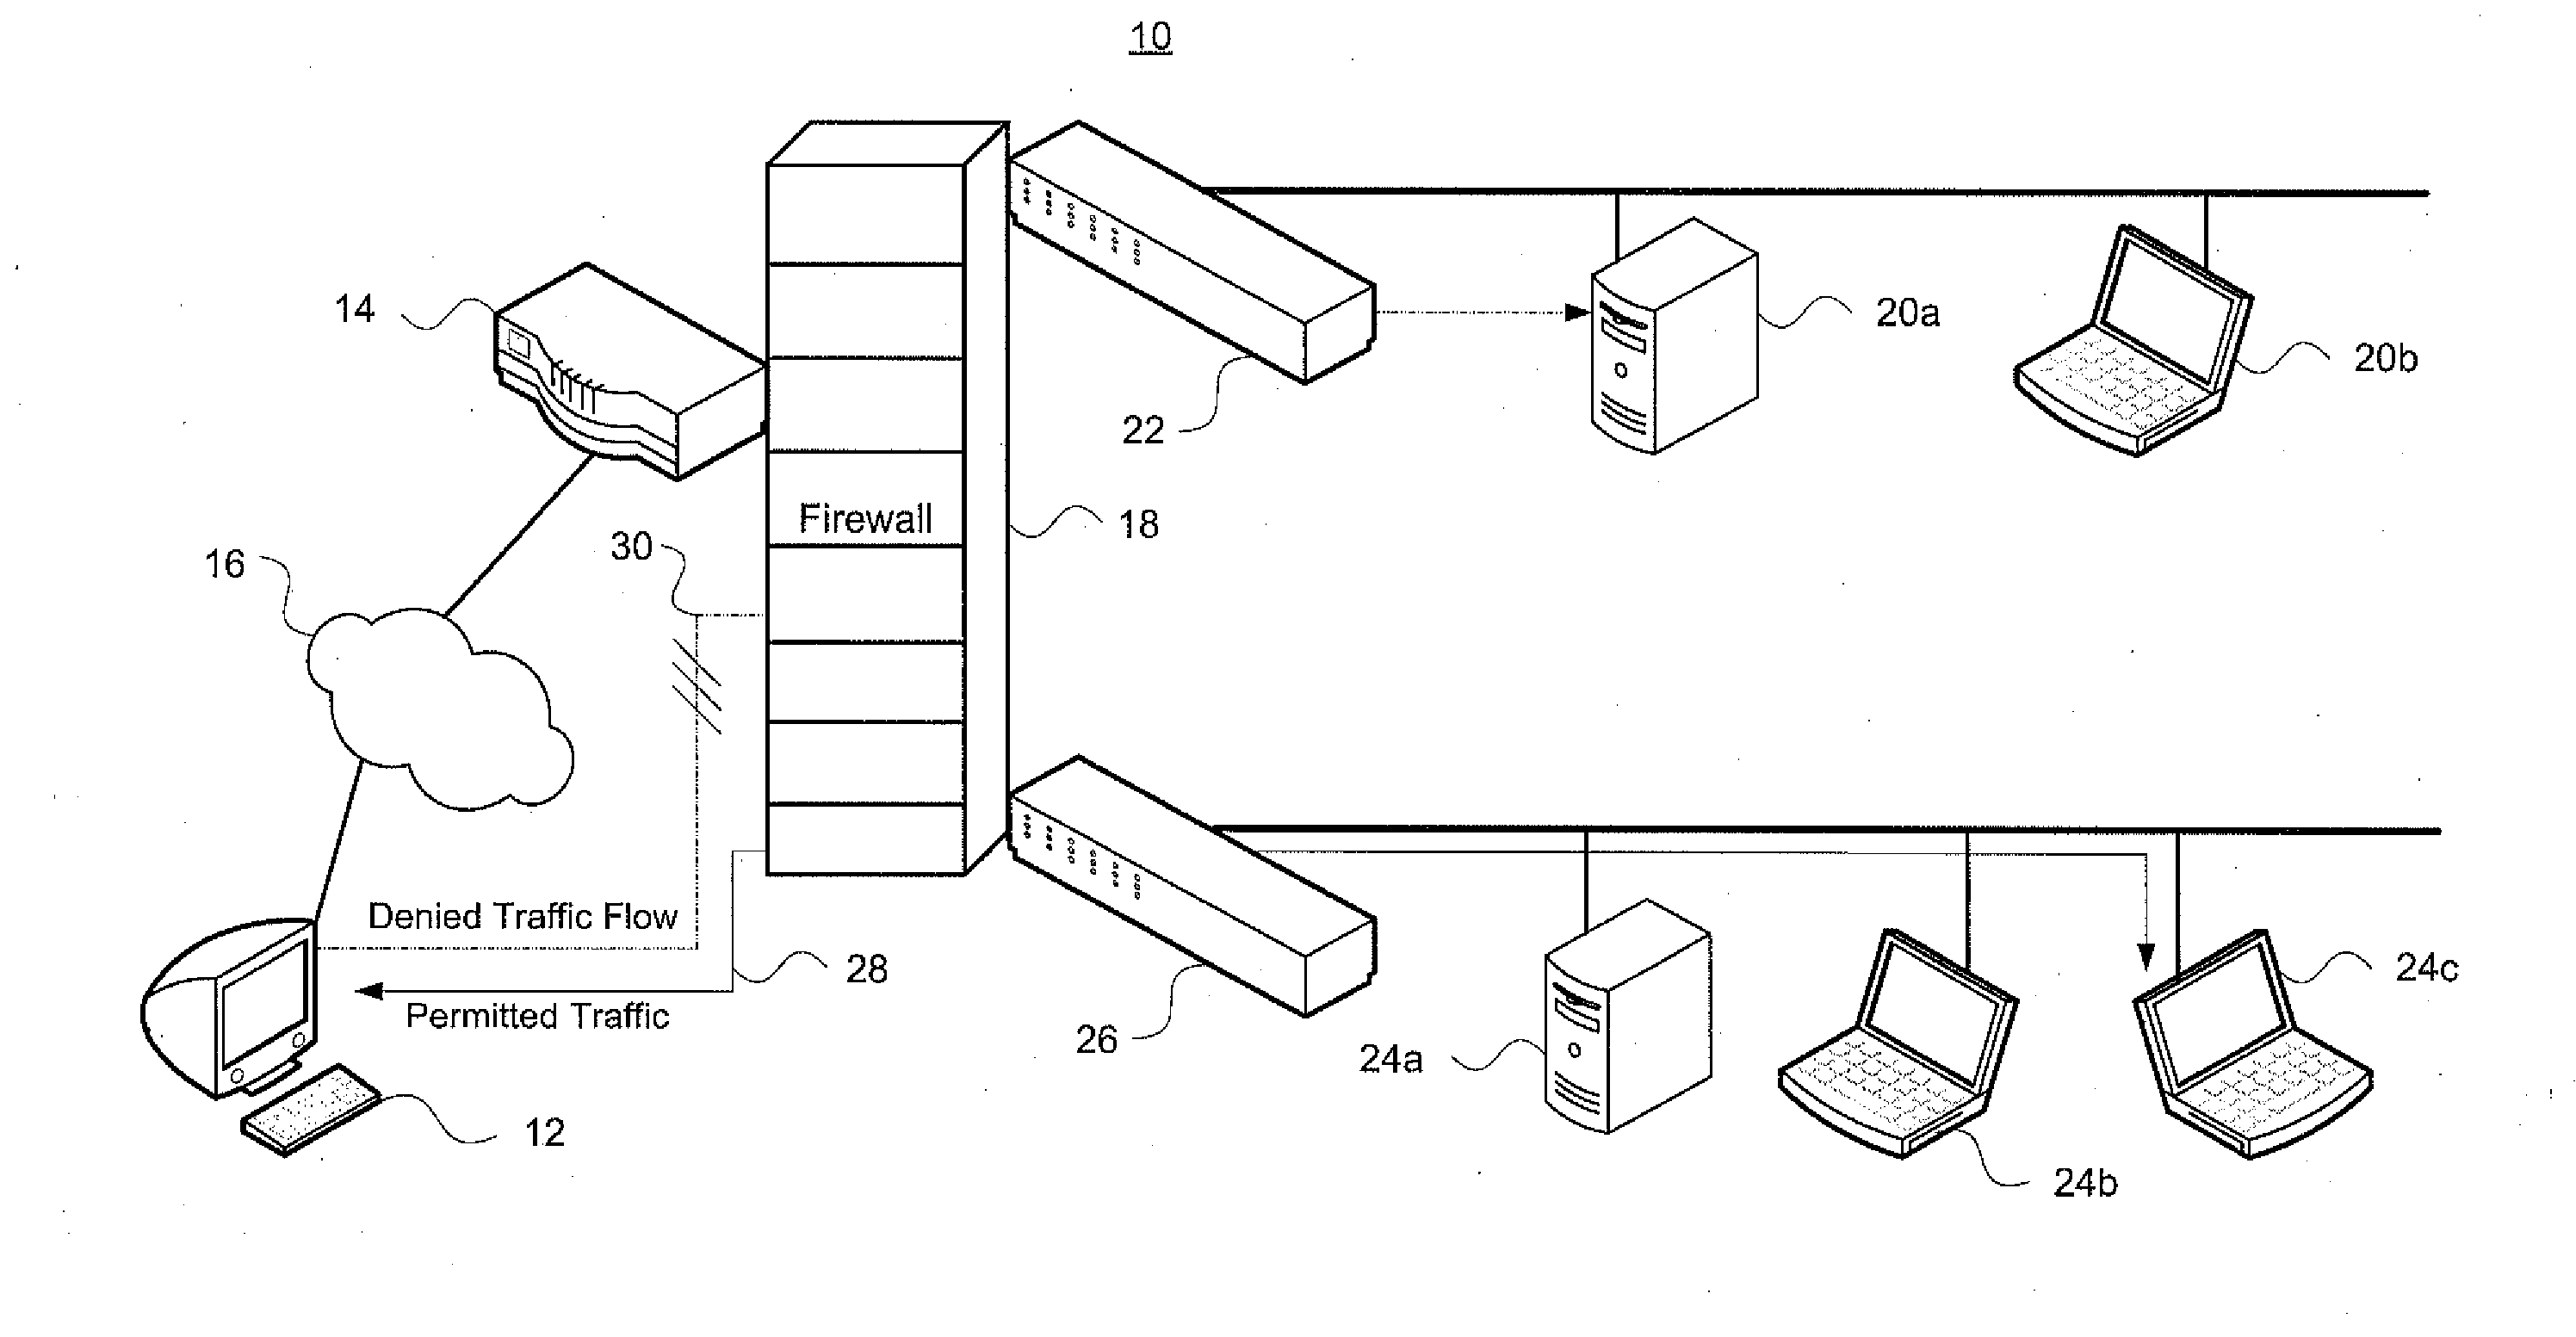 System and method for determining symantic equivalence between access control lists